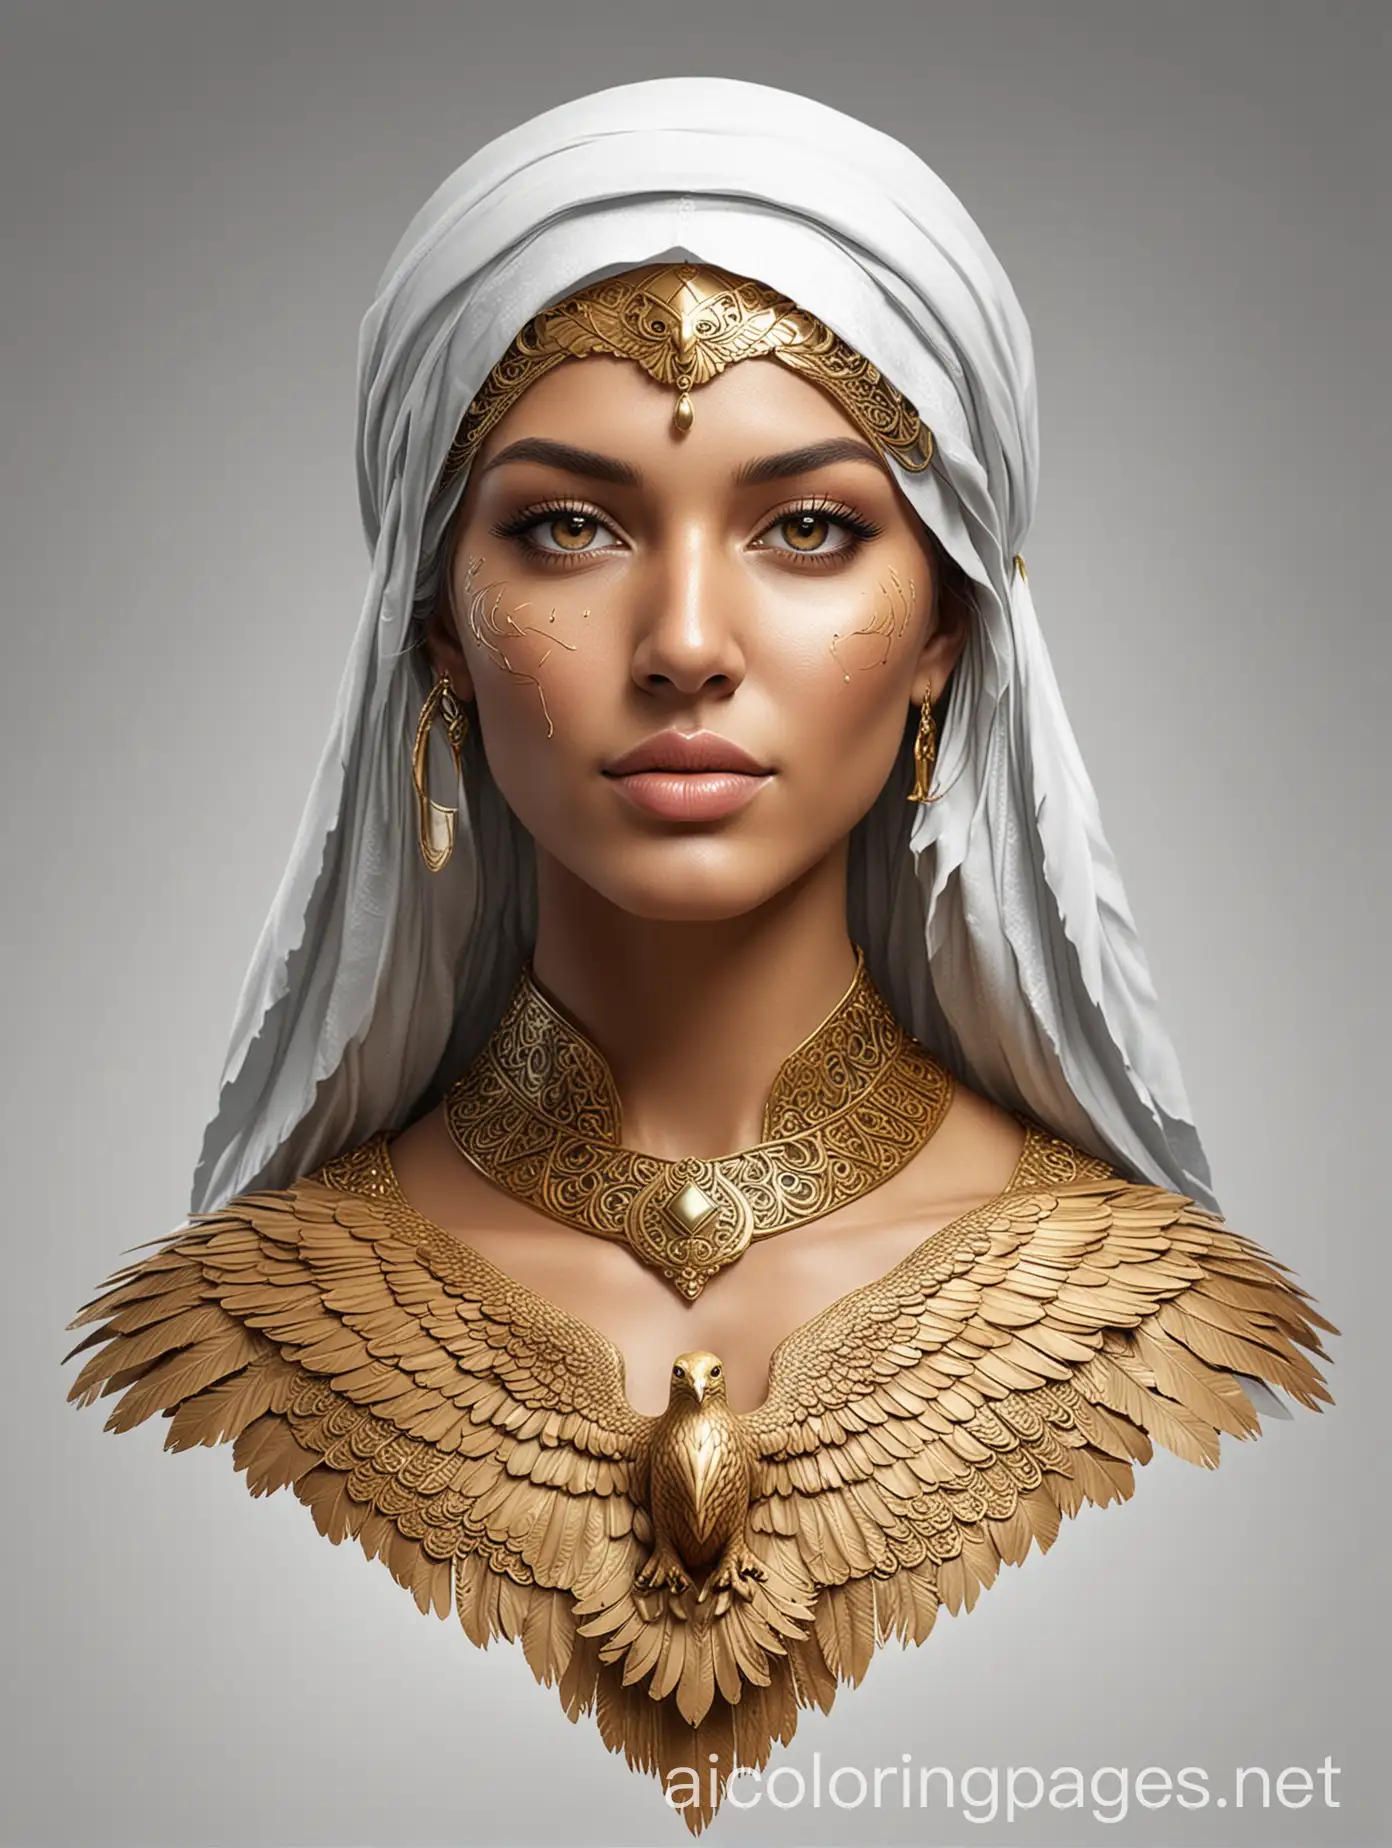  a  half golden eagle half woman, arabic art, fantasy digital effects,  female face split in half, half golden eagle half woman, beautifully  designed character, 3d character, 3d character, art landmark. High  quality art, fantasy character, advertising image, epic character art., Coloring Page, black and white, line art, white background, Simplicity, Ample White Space. The background of the coloring page is plain white to make it easy for young children to color within the lines. The outlines of all the subjects are easy to distinguish, making it simple for kids to color without too much difficulty